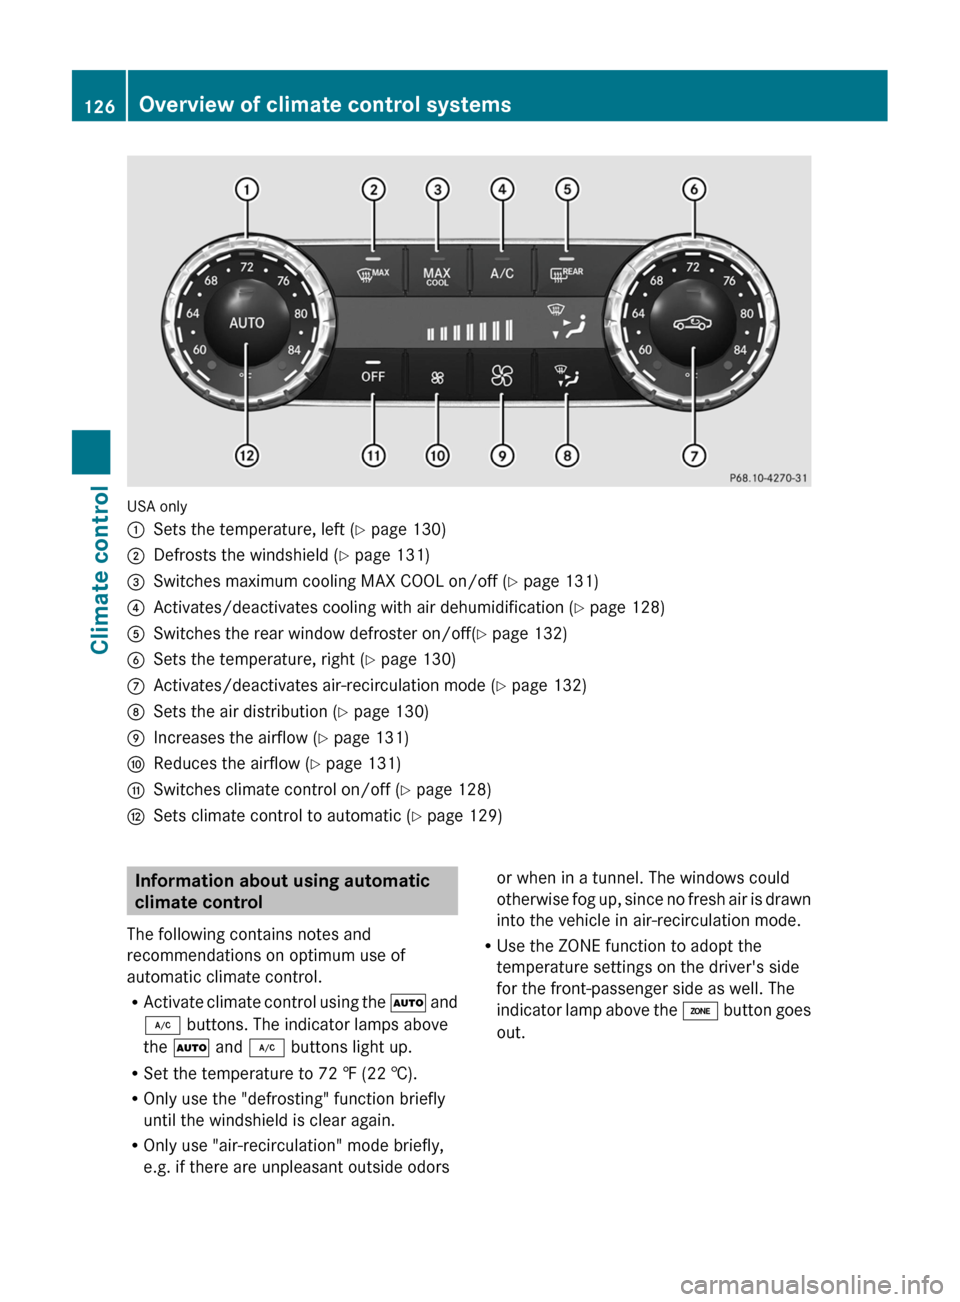 MERCEDES-BENZ CLS-Class 2013 W218 User Guide USA only
:
Sets the temperature, left ( Y page 130)
; Defrosts the windshield ( Y page 131)
= Switches maximum cooling MAX COOL on/off ( Y page 131)
? Activates/deactivates cooling with air dehumidifi